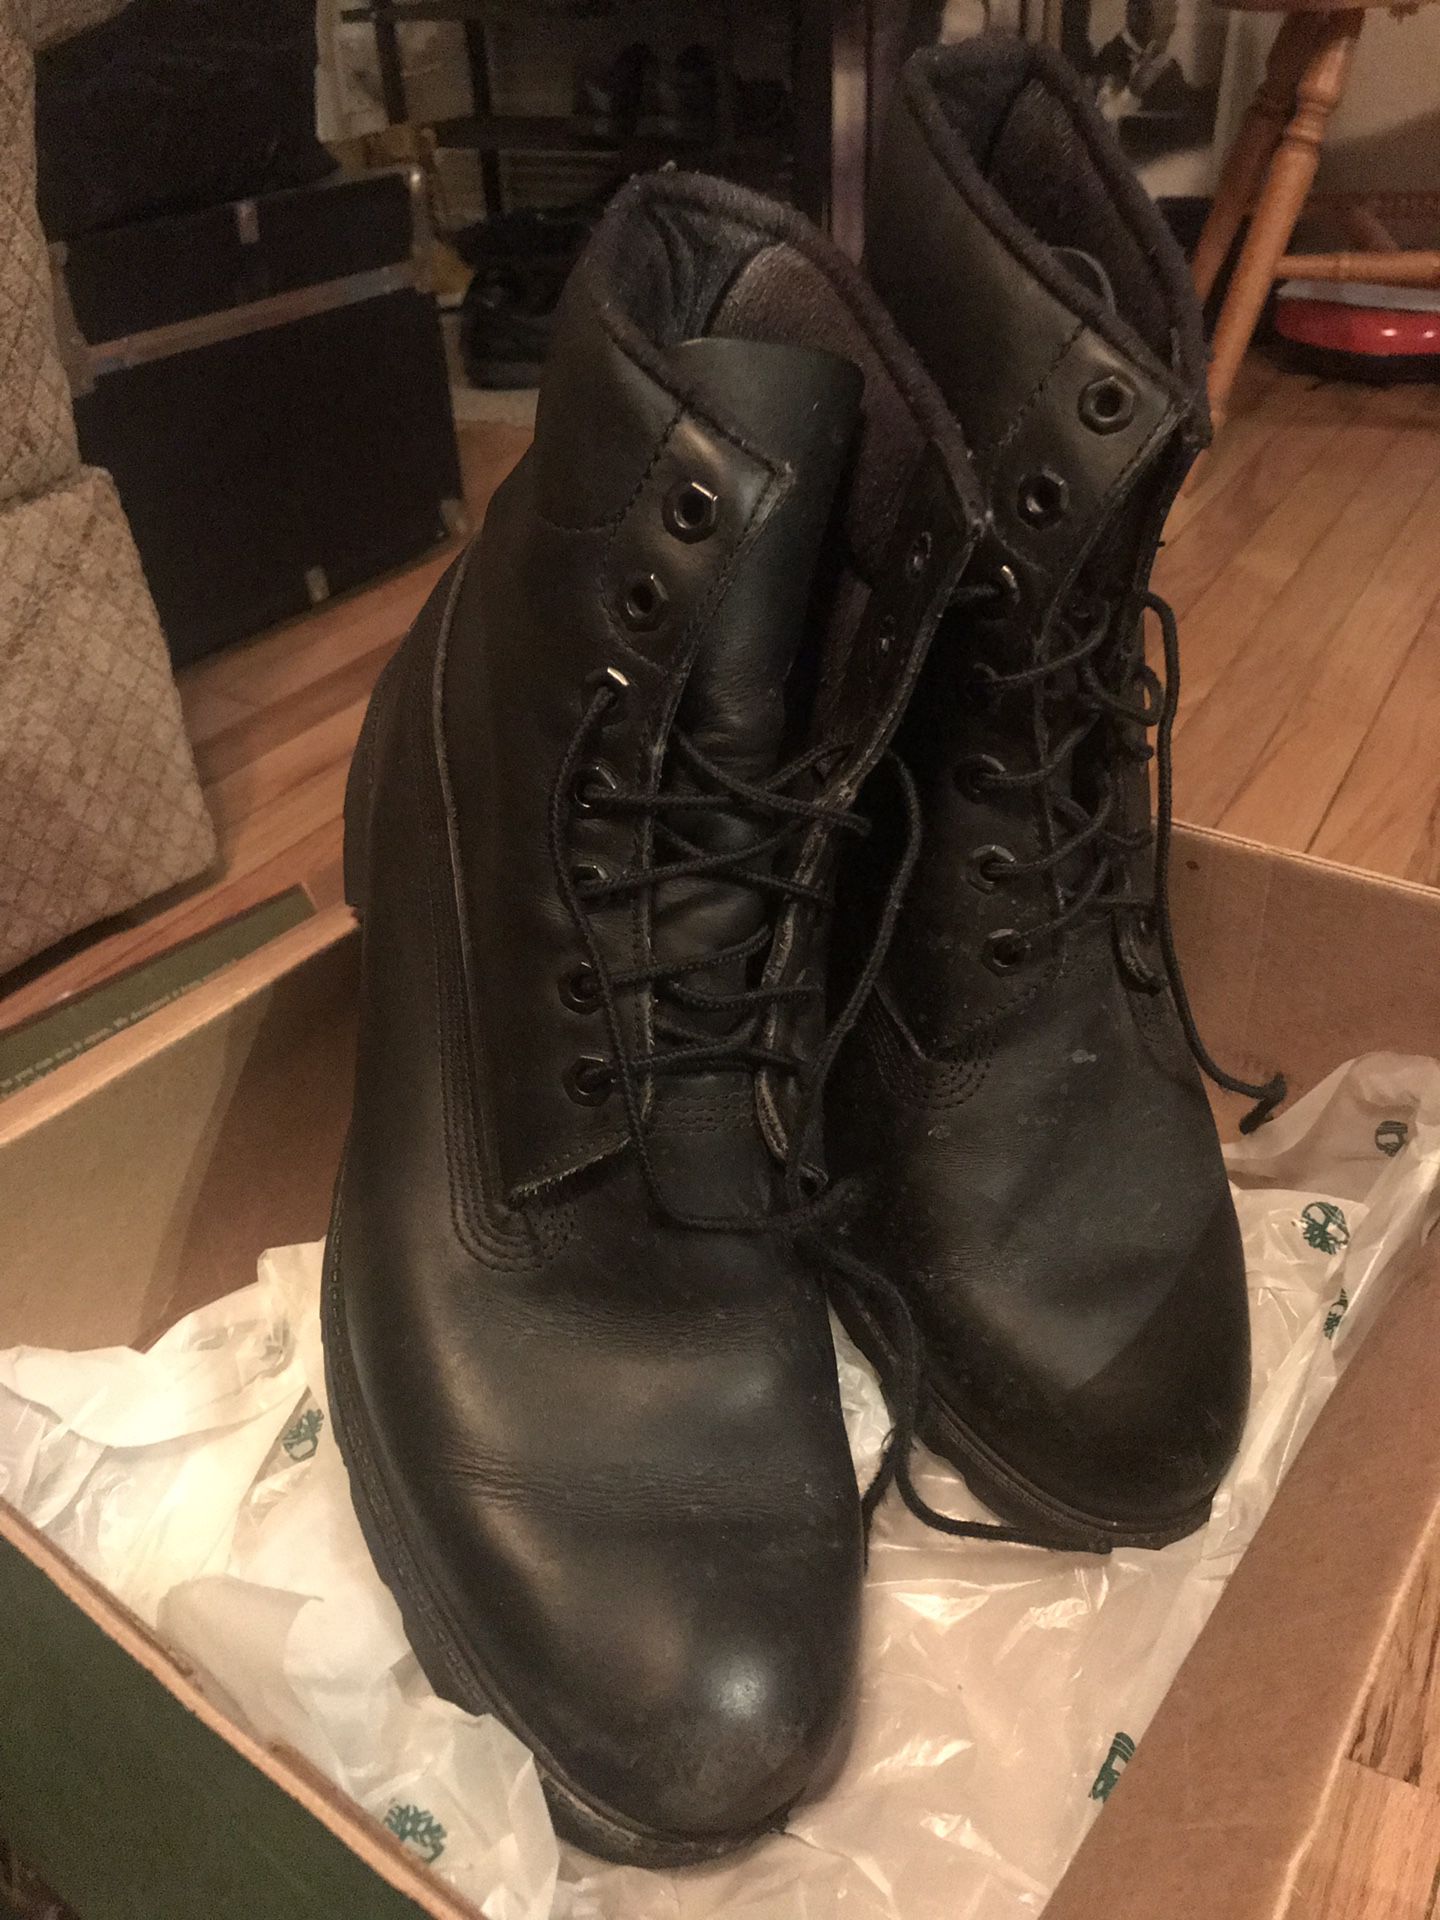 Men’s Timberland Boots- Black -Size 13 - Gently used.